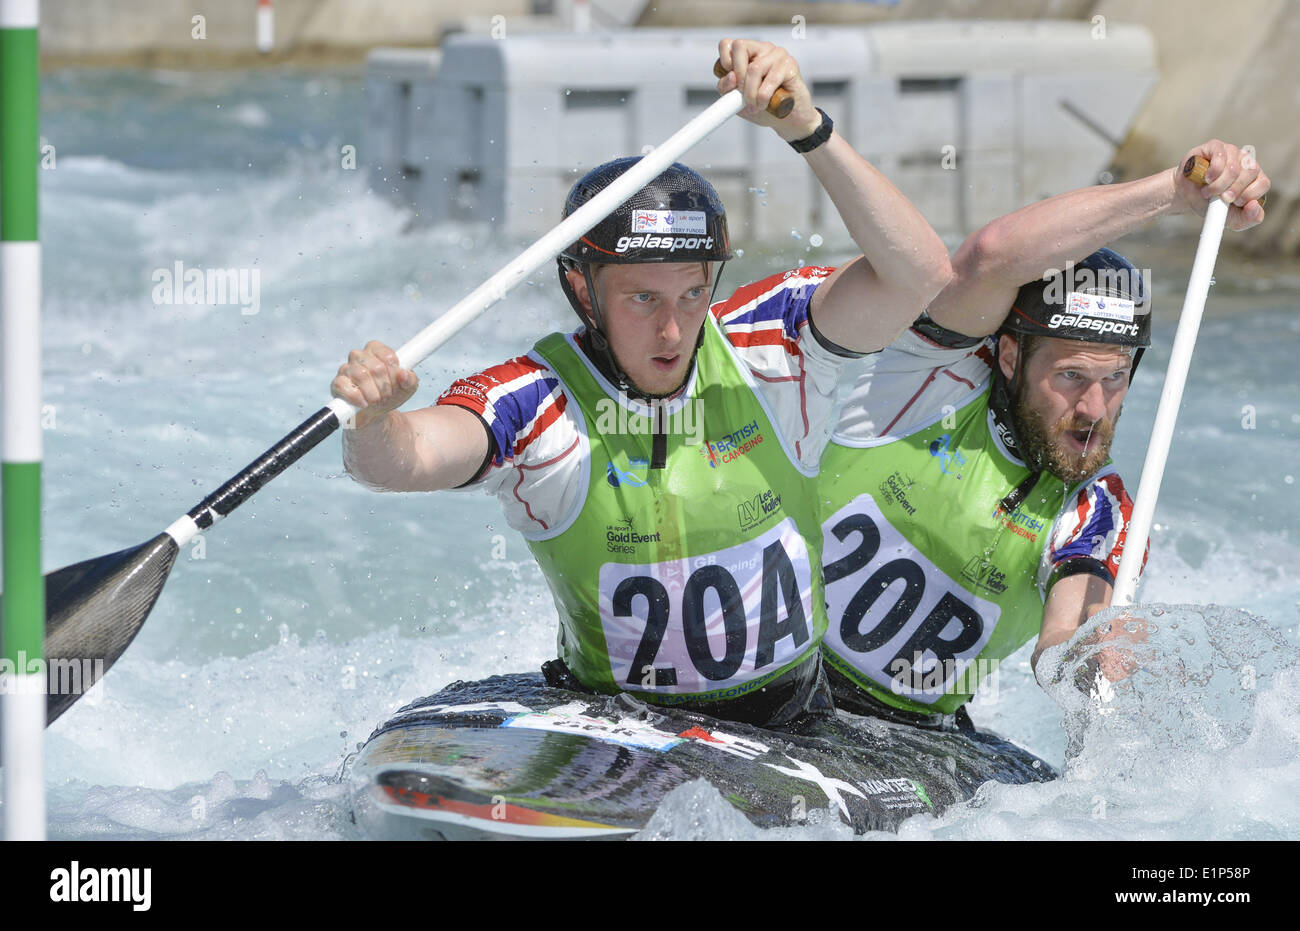 Waltham Cross, Hertfordshire, UK. 8th June, 2014. GB pair of RHYS DAVIES and MATTHEW LISTER drive at a gate during the C2 Men's Semi-Finals at Lee Valley White Water Centre: Steve FlynnZUMA Press Credit:  Steve Flynn/ZUMA Wire/ZUMAPRESS.com/Alamy Live News Stock Photo